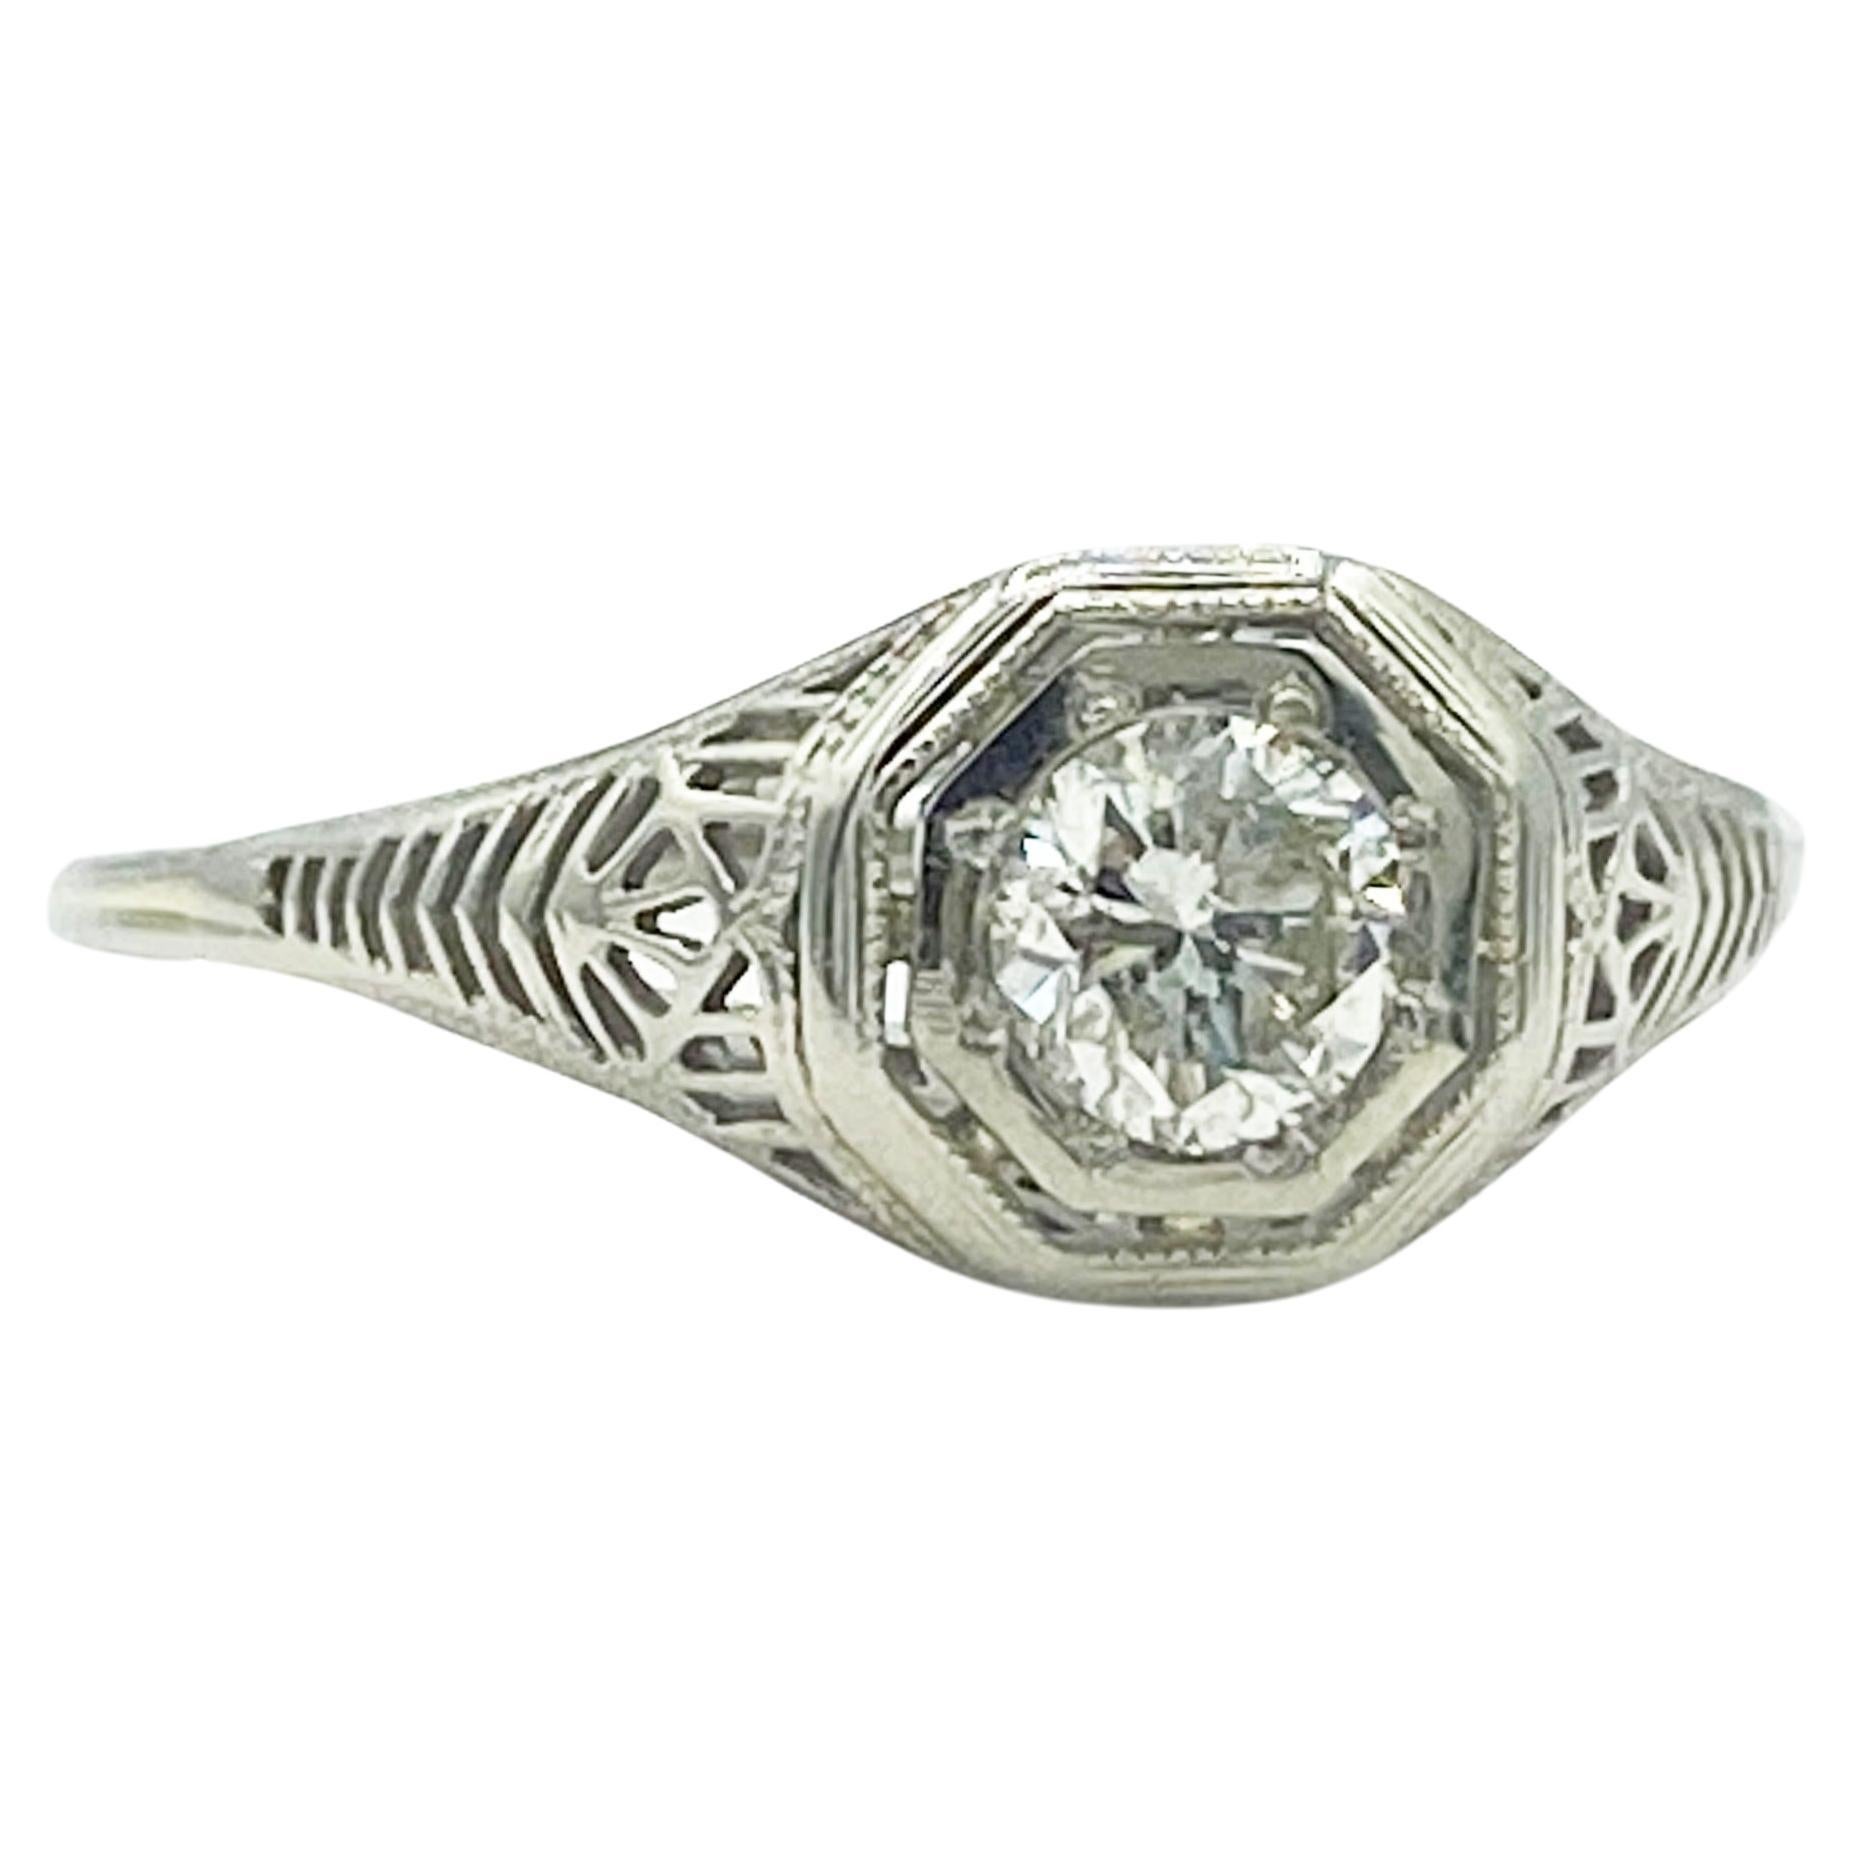 Unique antique Art Deco diamond 18k white gold engagement ring with a finely detailed shank. The Old European cut diamond solitaire is placed in an octagonal setting. The shoulders and shank have impressive milgrain and openwork filigree that